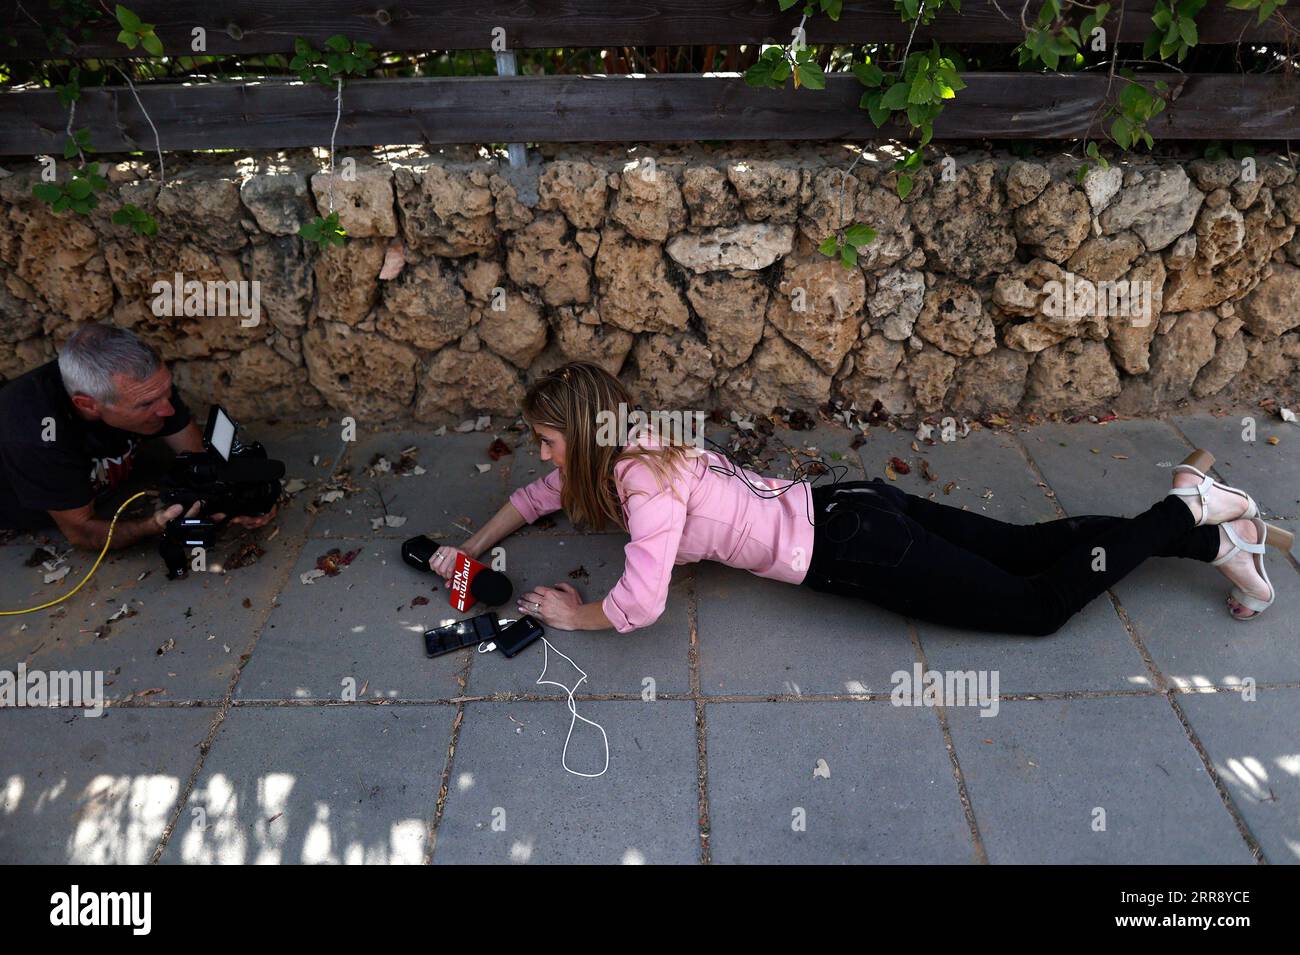 210520 -- ASHKELON ISRAEL, May 20, 2021 -- People take cover as a siren warning of incoming rockets fired from the Gaza Strip sounds in Ashkelon, southern Israel, on May 20, 2021. Both Israel and Hamas, which rules the Gaza Strip, have accepted an Egyptian-brokered deal to cease fighting at 2 a.m. Friday local time 2300 GMT Thursday to end the 11-day bloodshed. The heaviest fighting between Israel and Gaza militants since 2014 has so far killed 232 Palestinians, including 65 children and 39 women, and 12 Israelis.  via Xinhua ISRAEL-ASHKELON-ROCKET-ATTACK IlanxAssayag/JINI PUBLICATIONxNOTxINxC Stock Photo